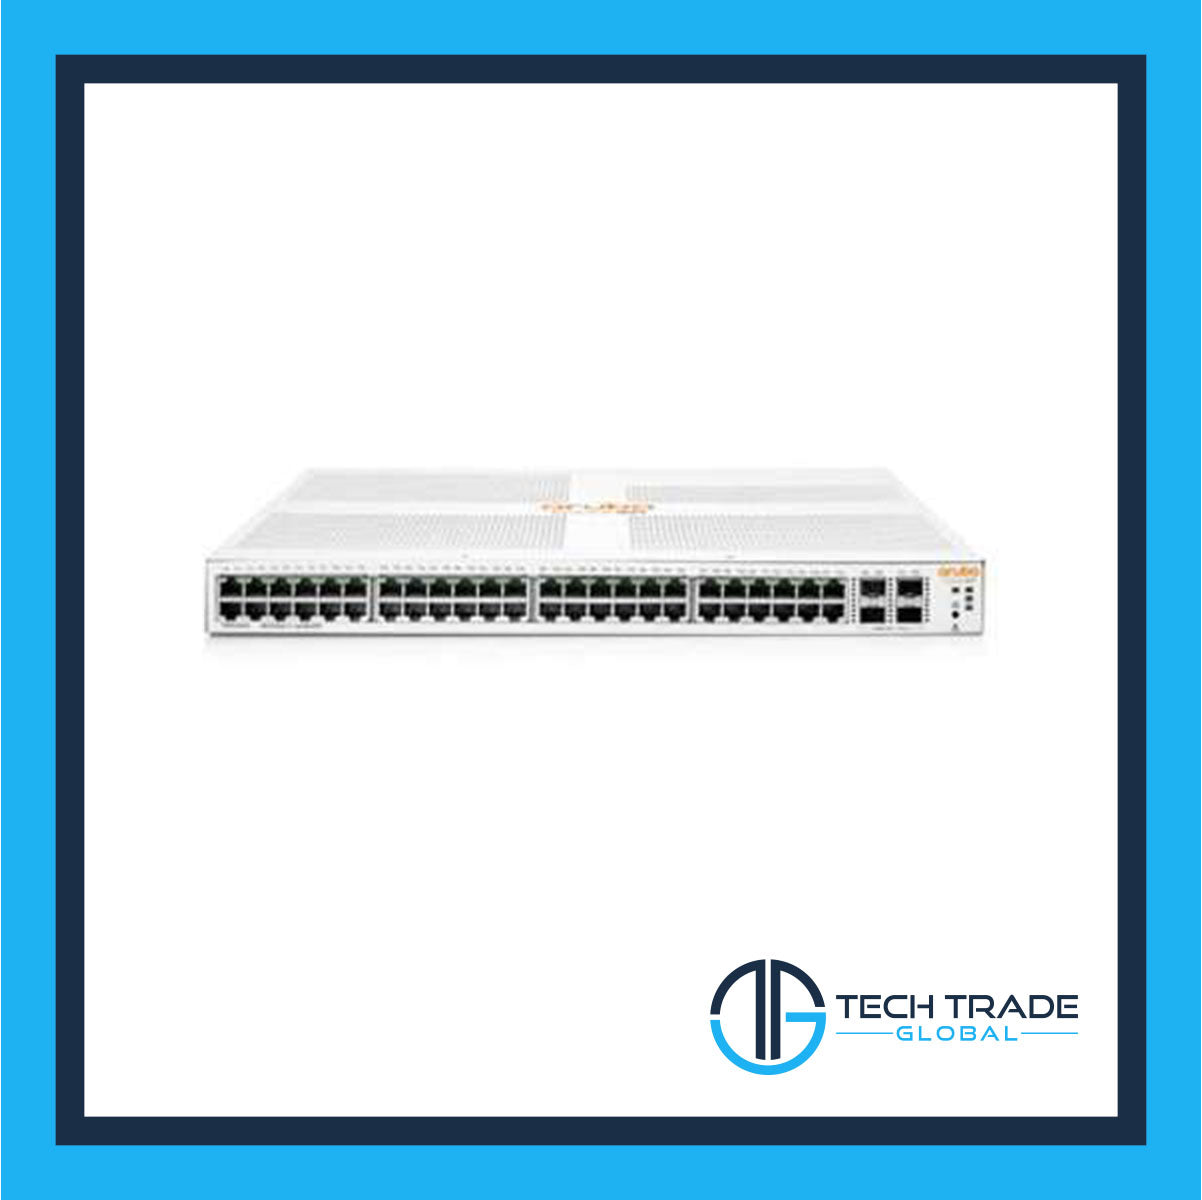 JL685A | HPE Aruba Instant On 1930 48G 4SFP/SFP+ Switch - switch - 48 ports - managed - rack-mountable